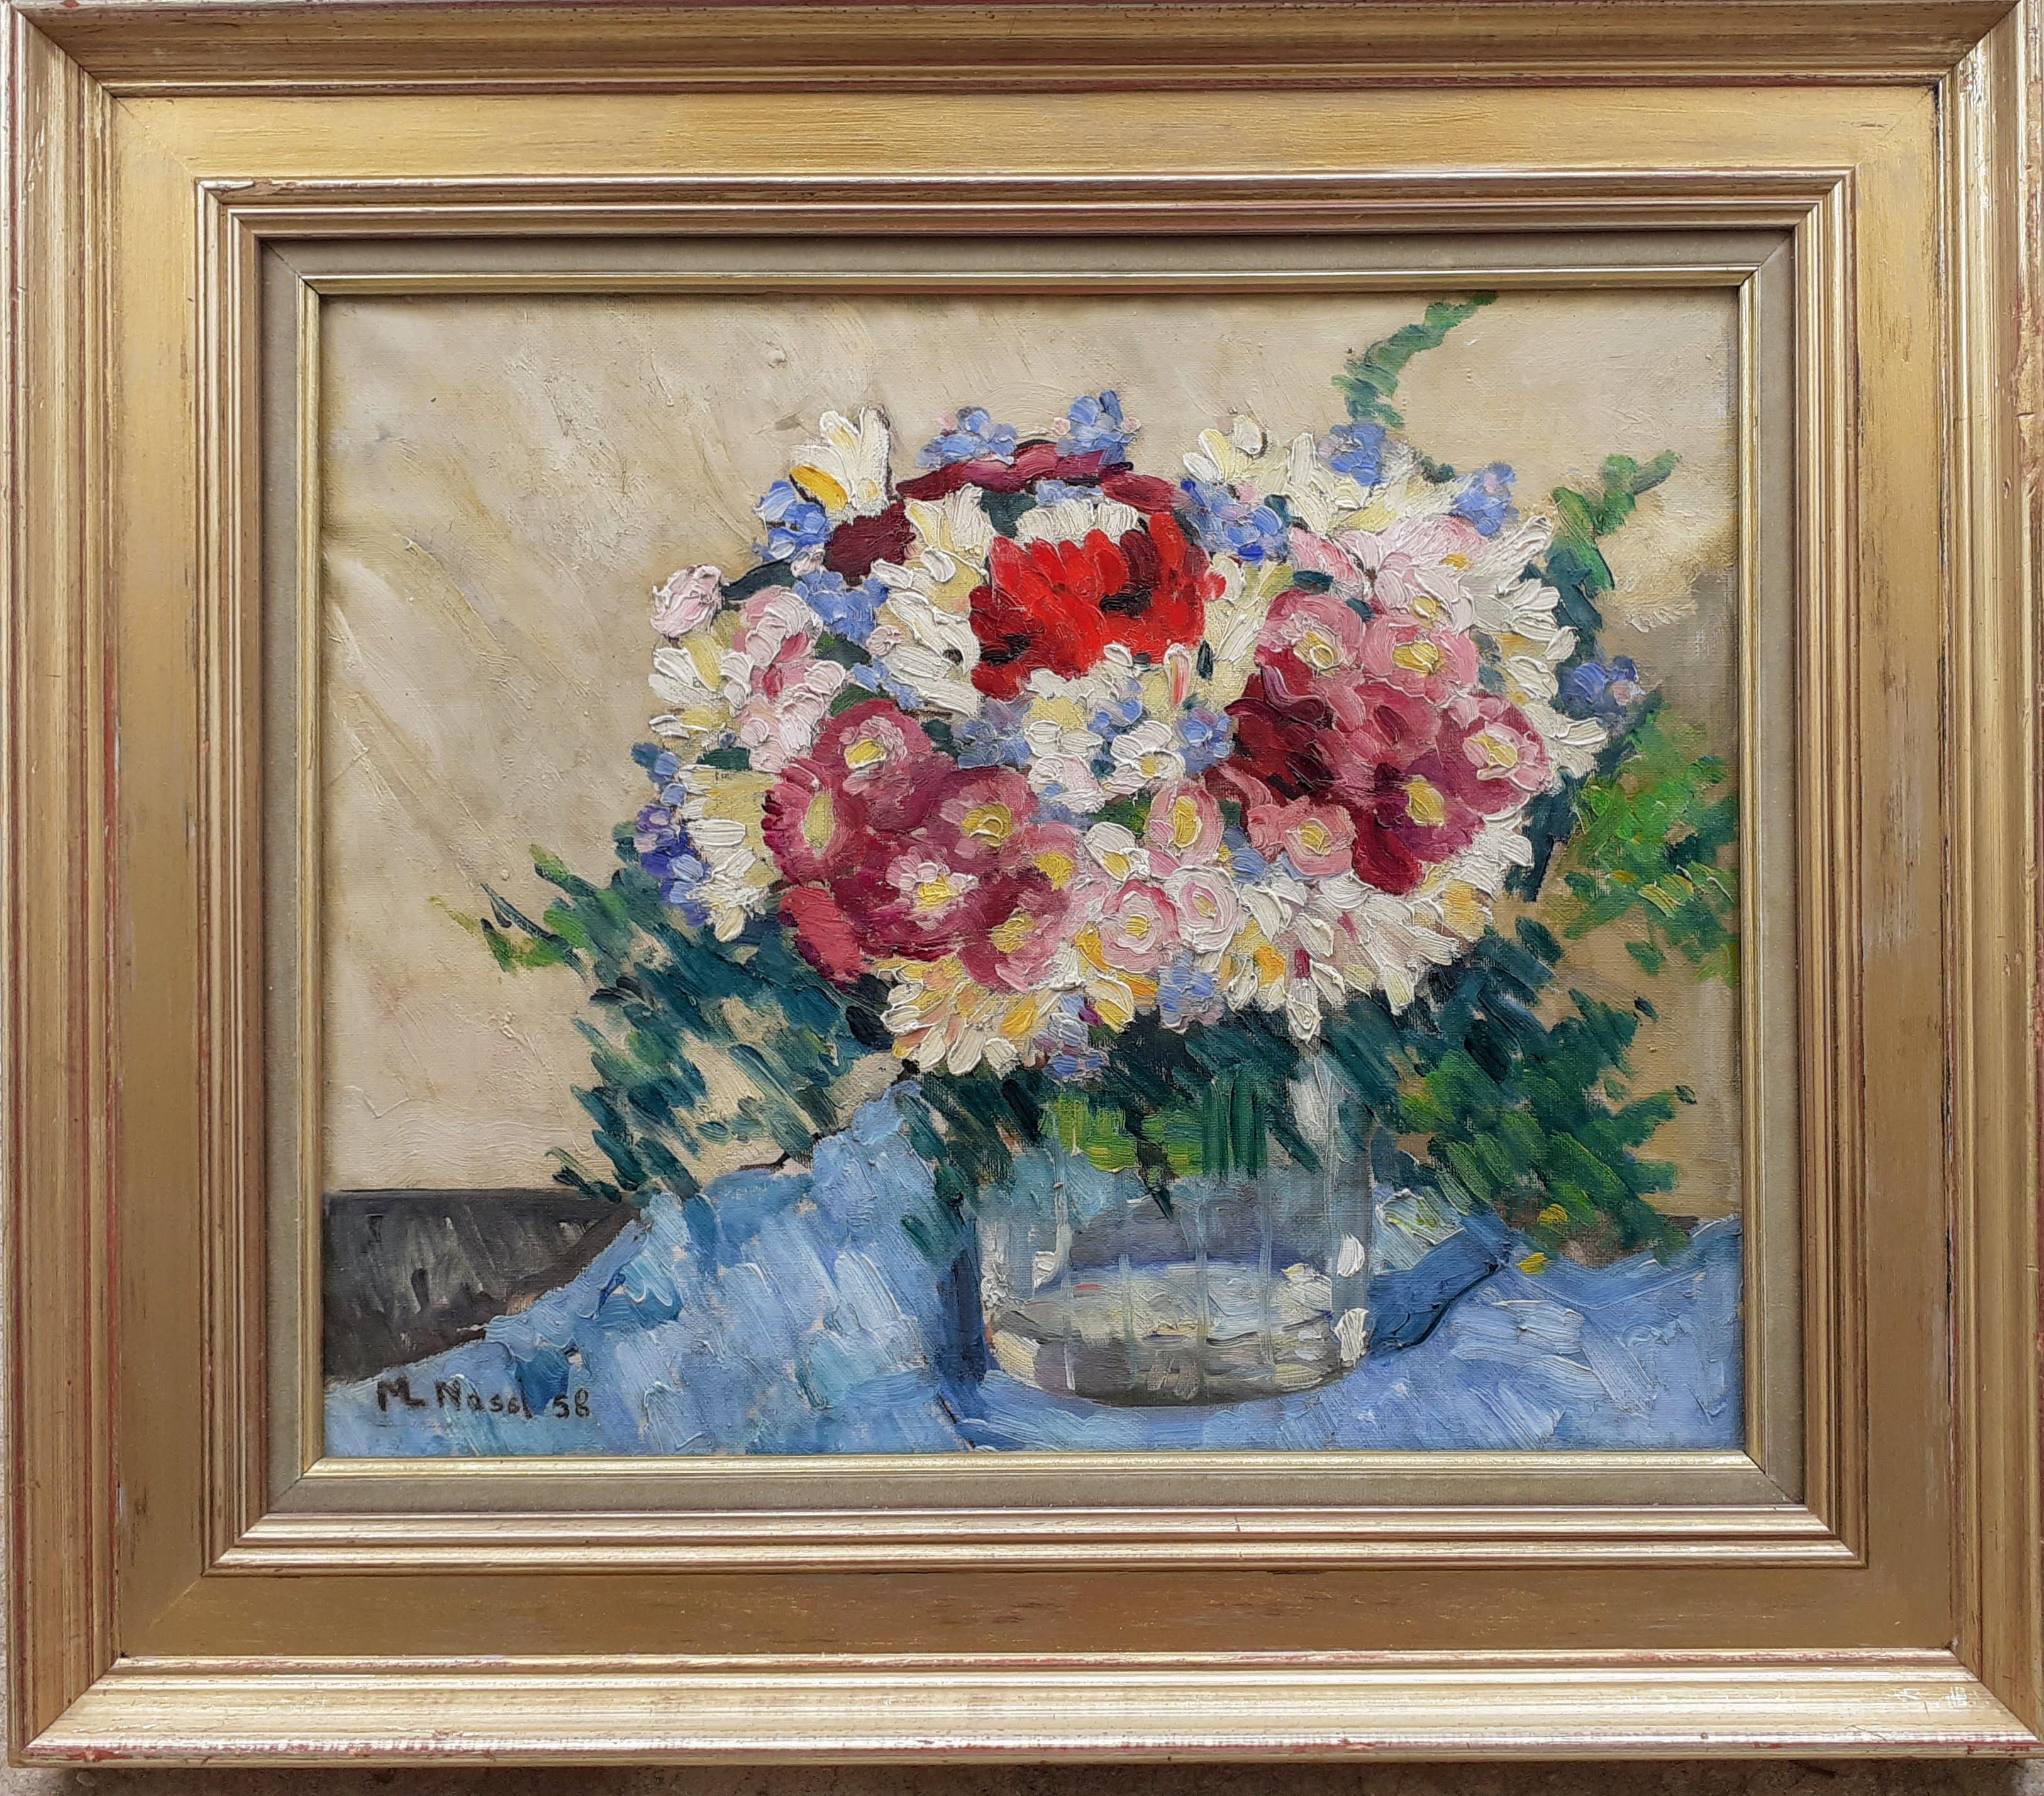 Spring Flowers post impressionist floral still life oil by woman artist painting